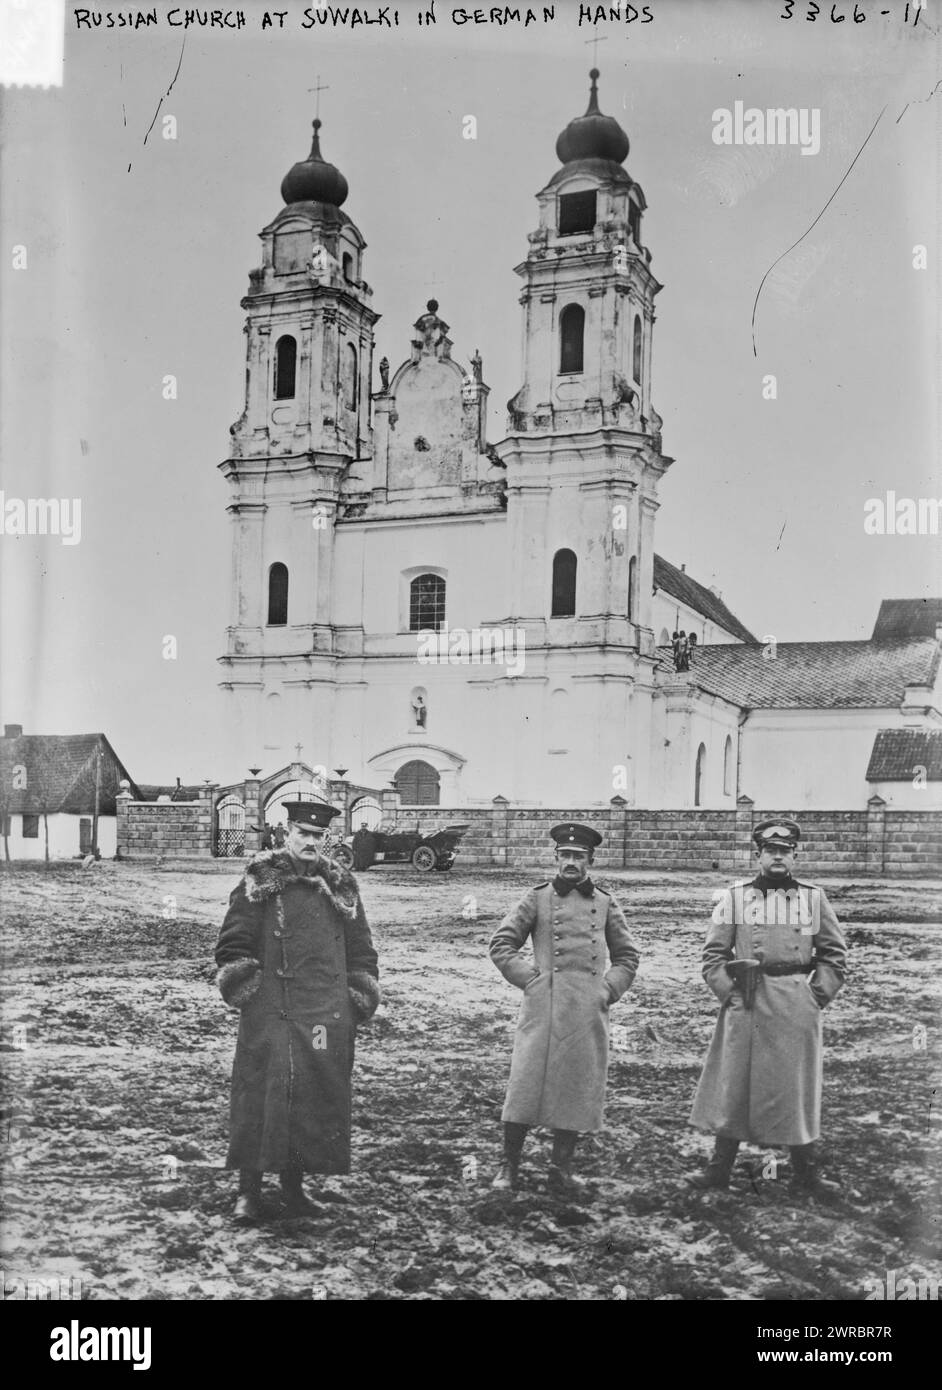 Russian Church at Suwalki in German hands, Photograph shows German soldiers outside a Russian church in Suwalki, Poland during World War I., between ca. 1914 and ca. 1915, World War, 1914-1918, Glass negatives, 1 negative: glass Stock Photo